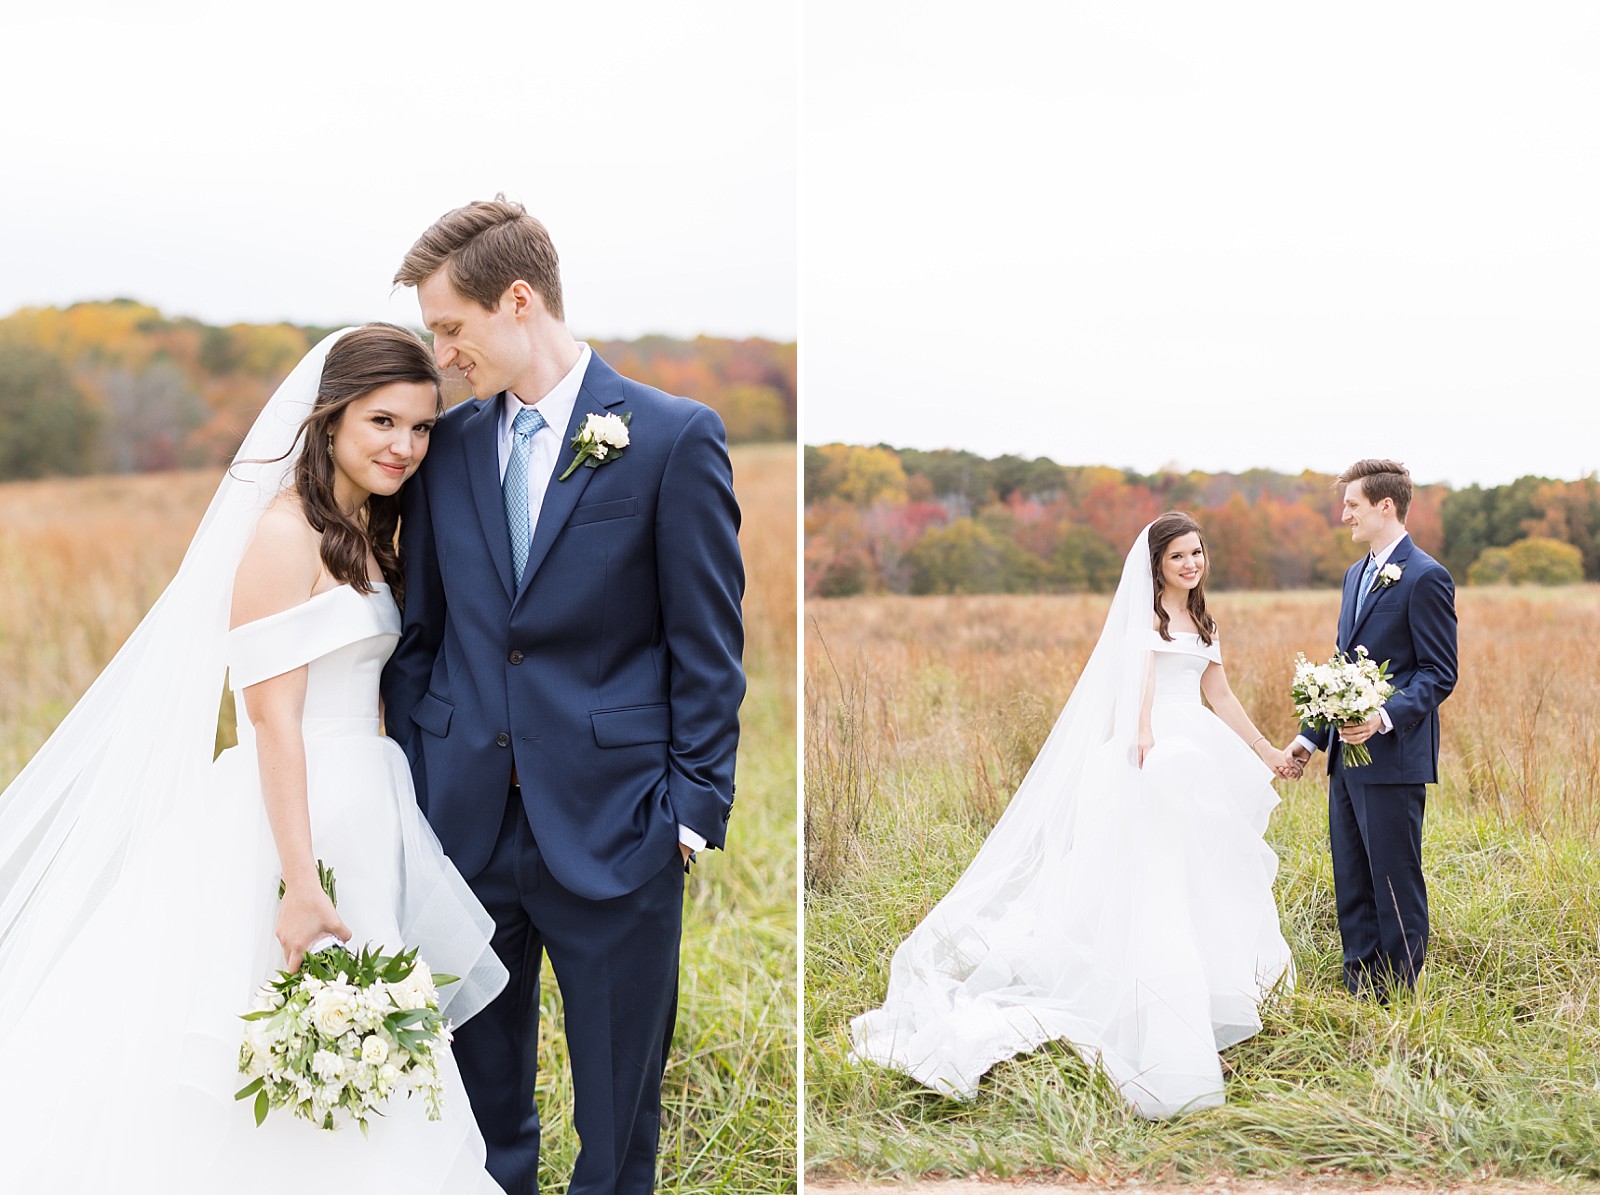 Fall wedding Inspiration | Fall Wedding at The Meadows in Raleigh | Raleigh NC Wedding Photographer